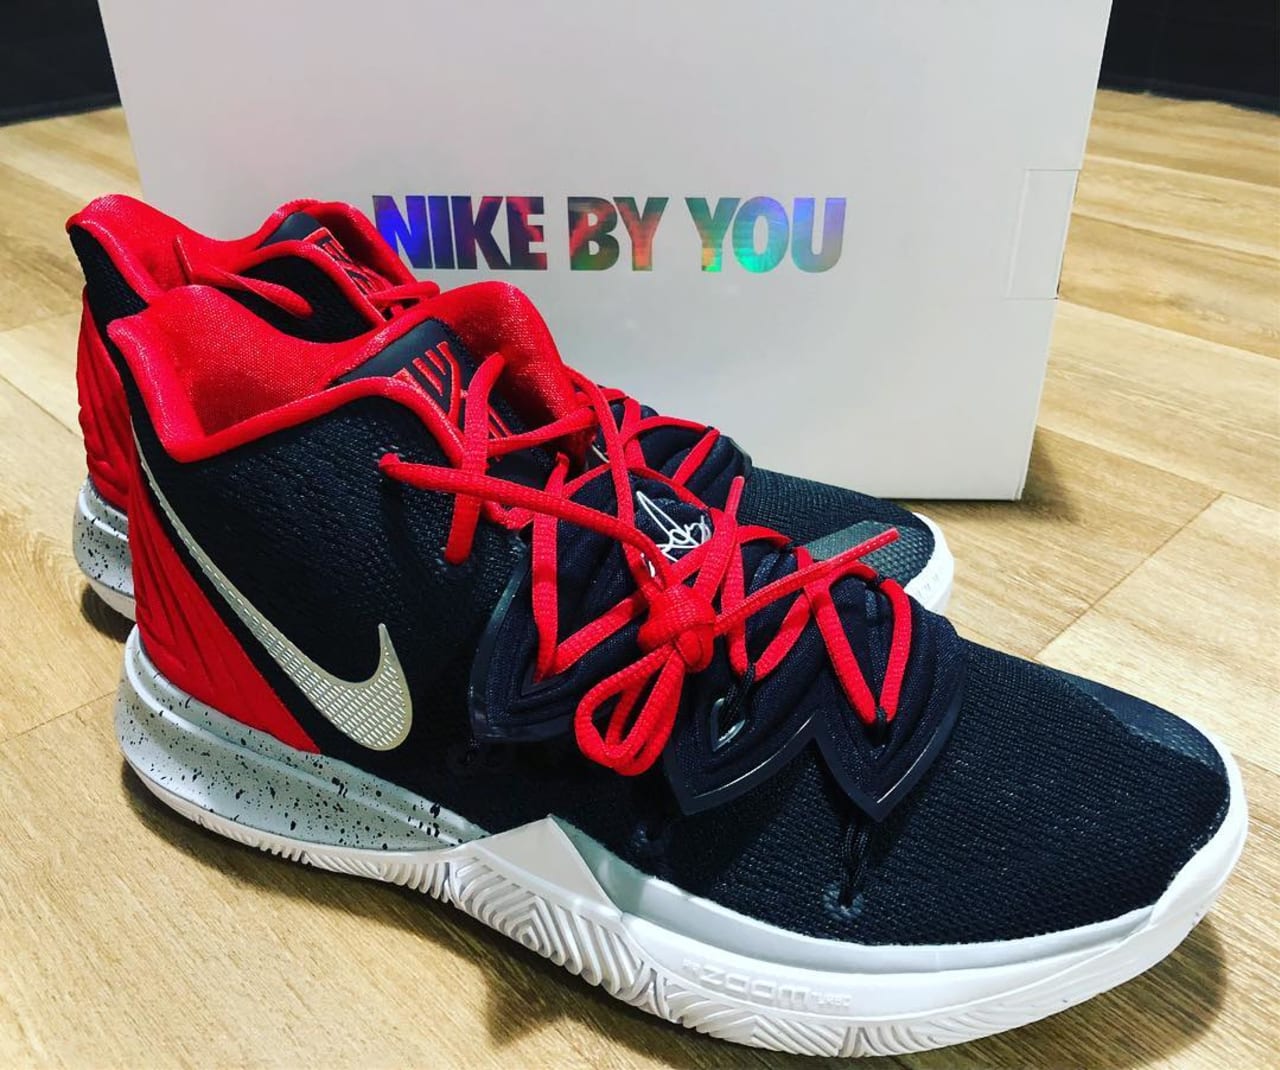 kyrie 5 by you nike